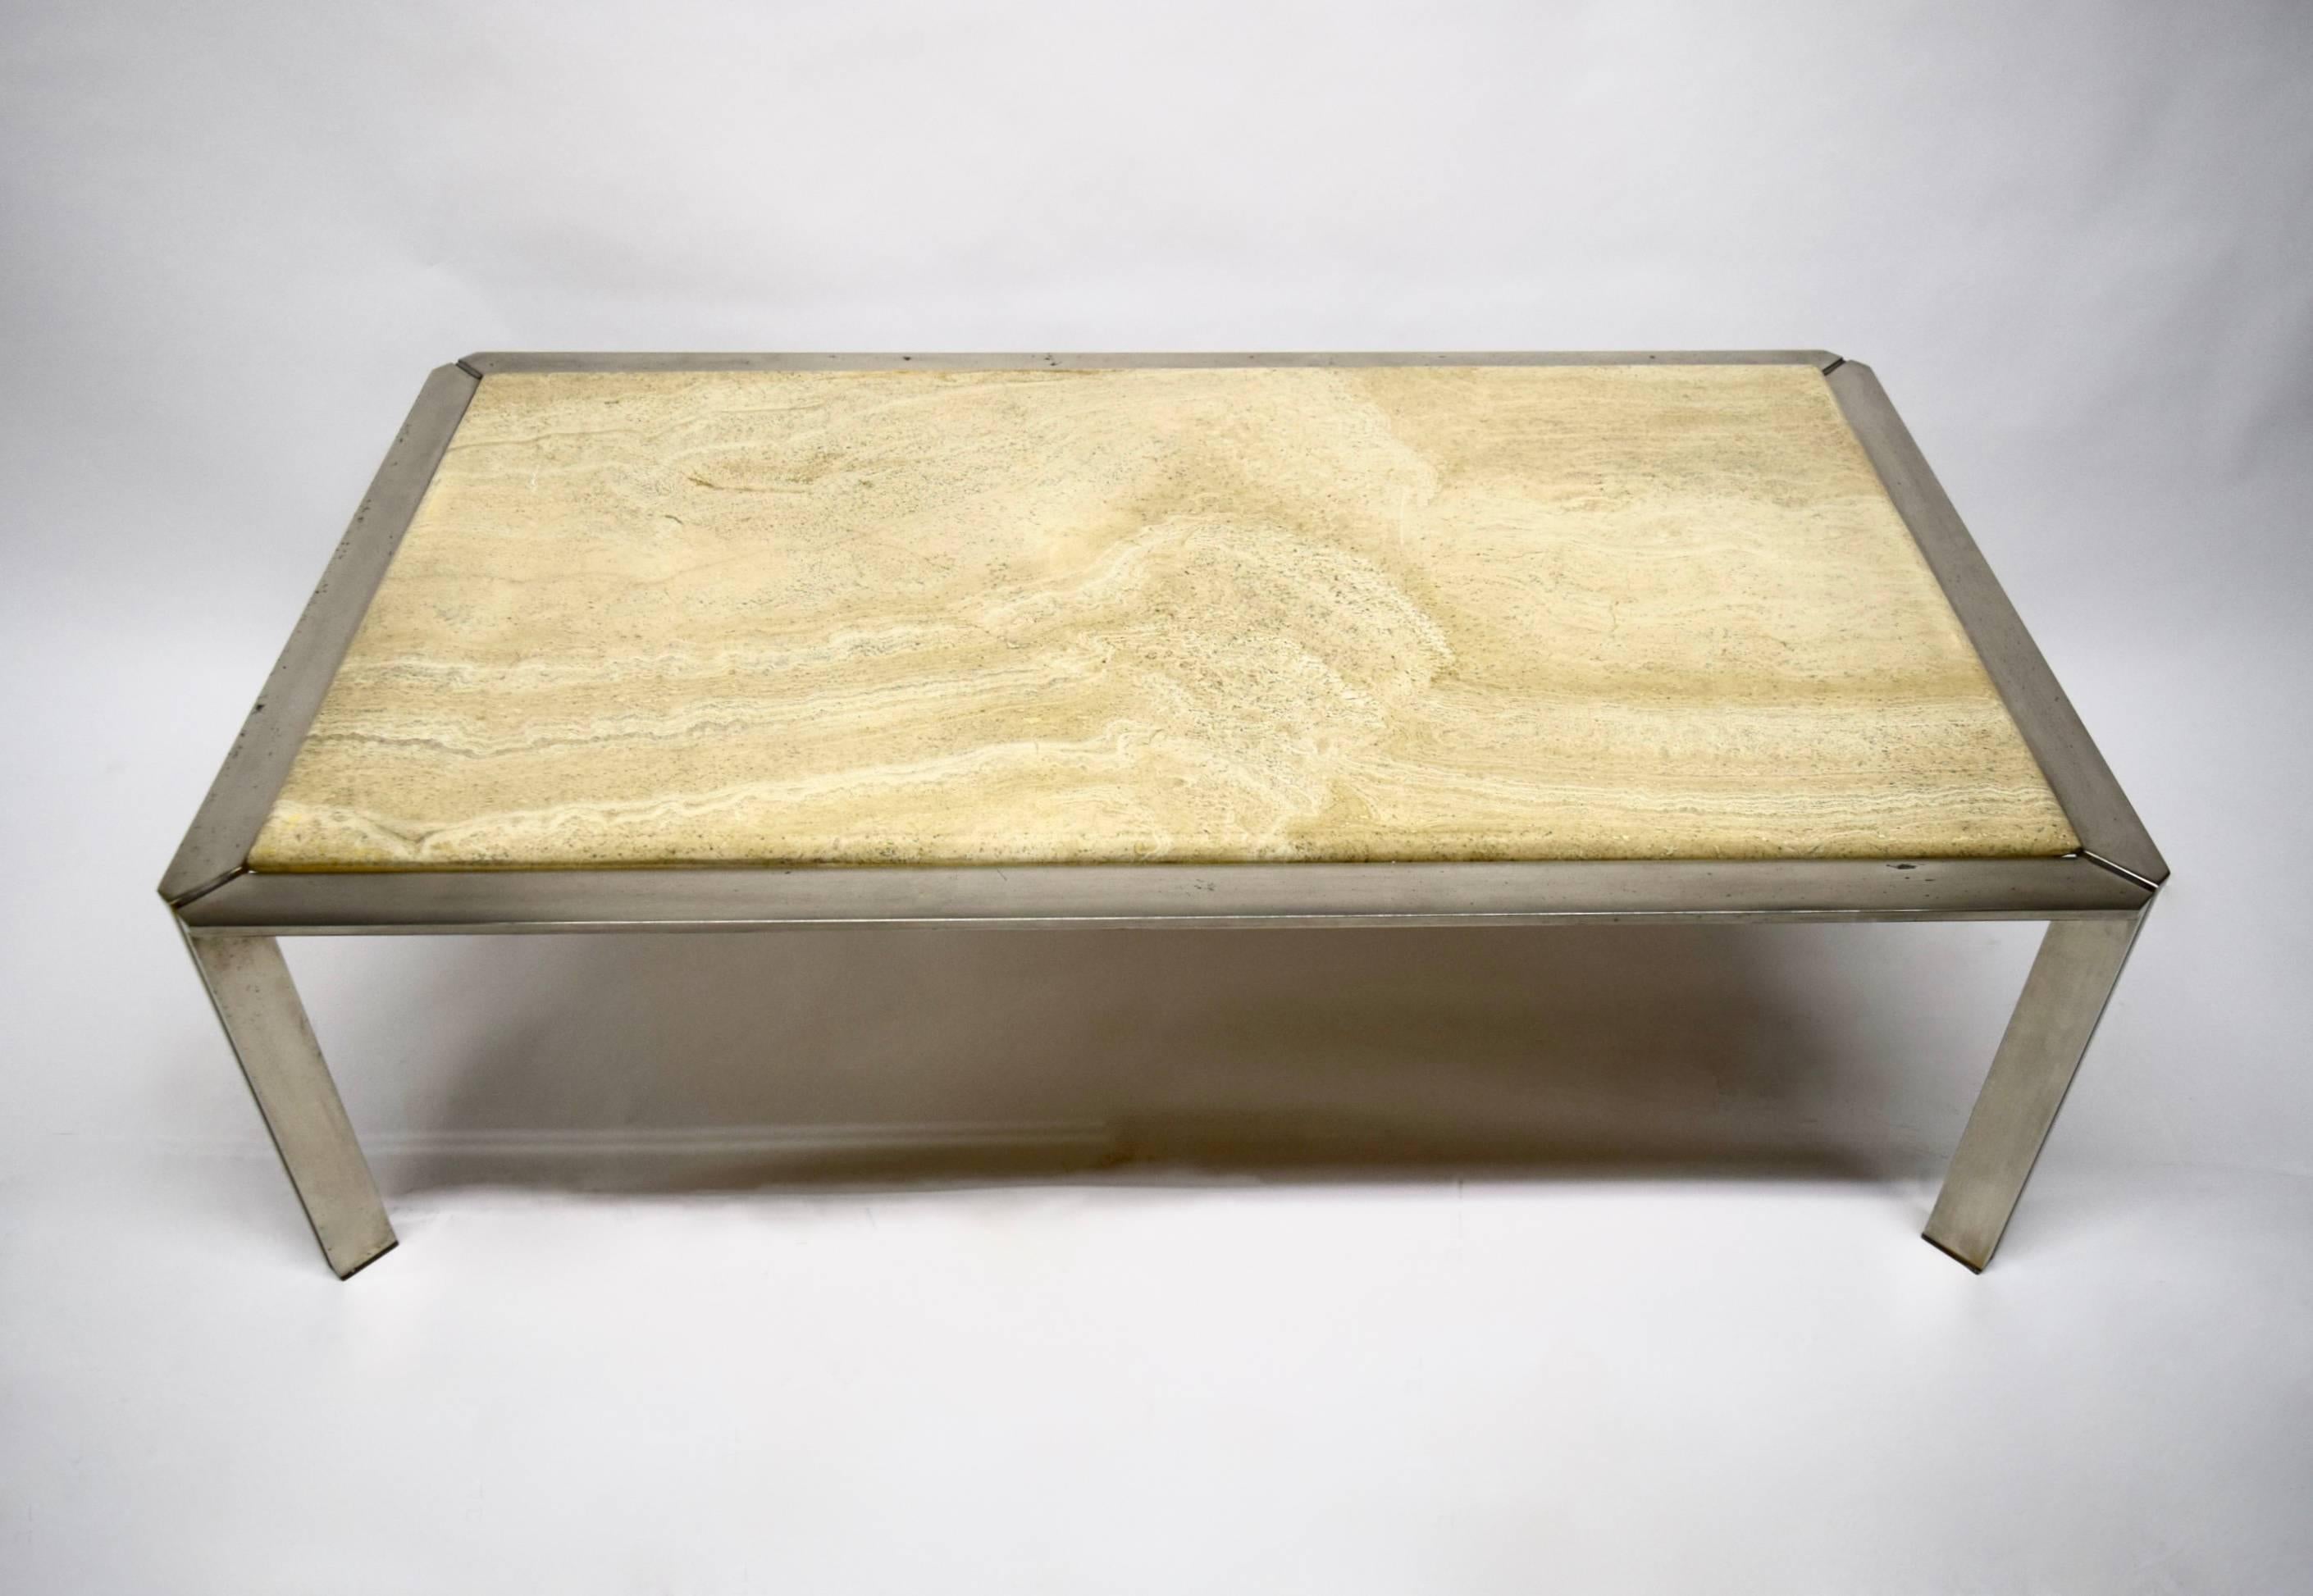 Coffee table has a nickel-plated solid steel base, each leg with linearly cut corners that form a T, and an inset finished travertine top with curved edges.